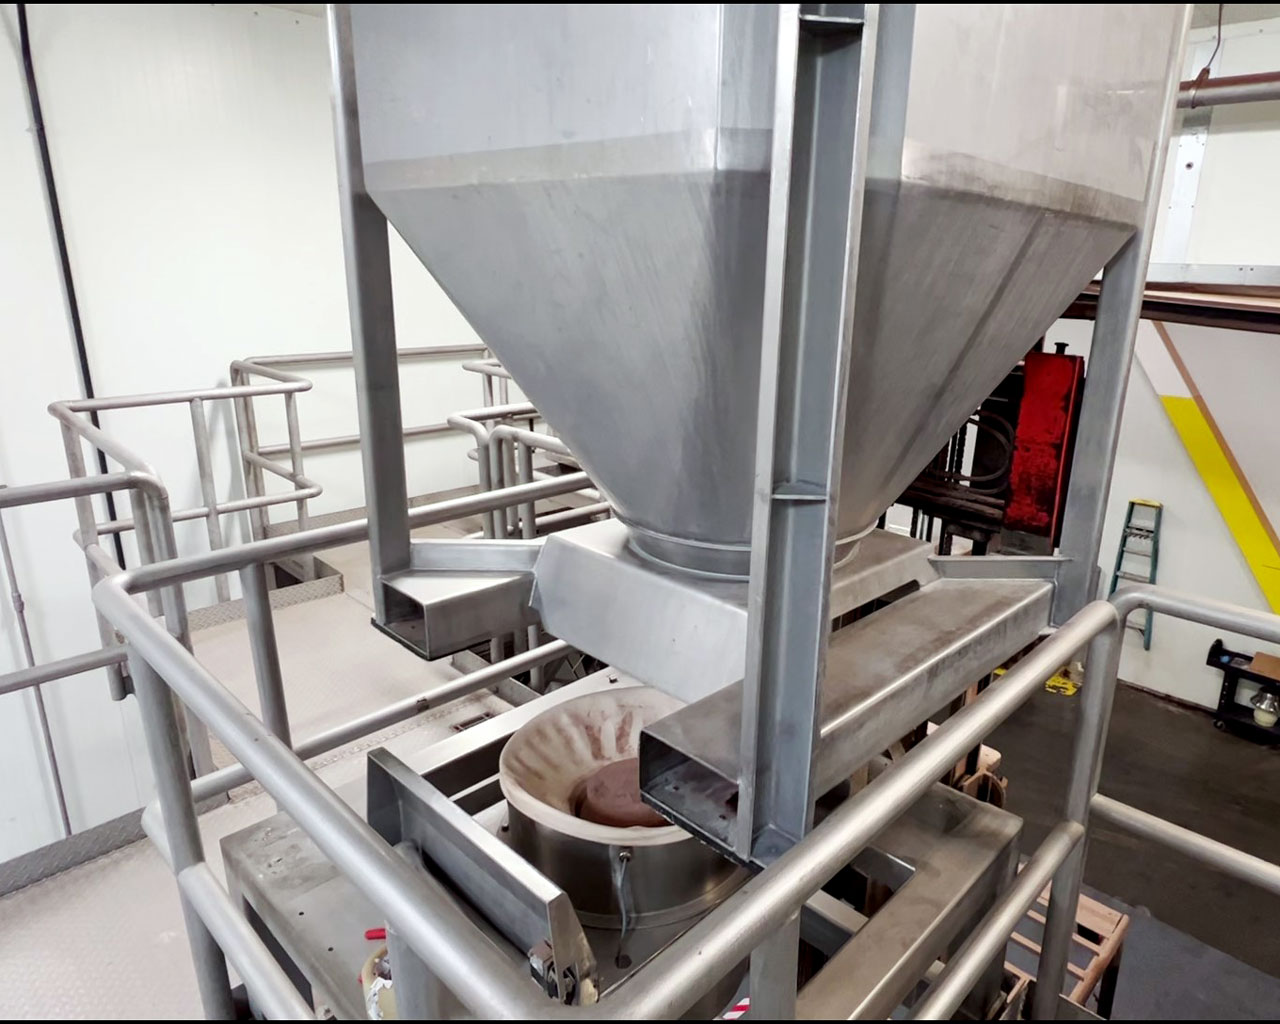 lowering stainless steel IBC bin onto discharge station above powder packaging machine